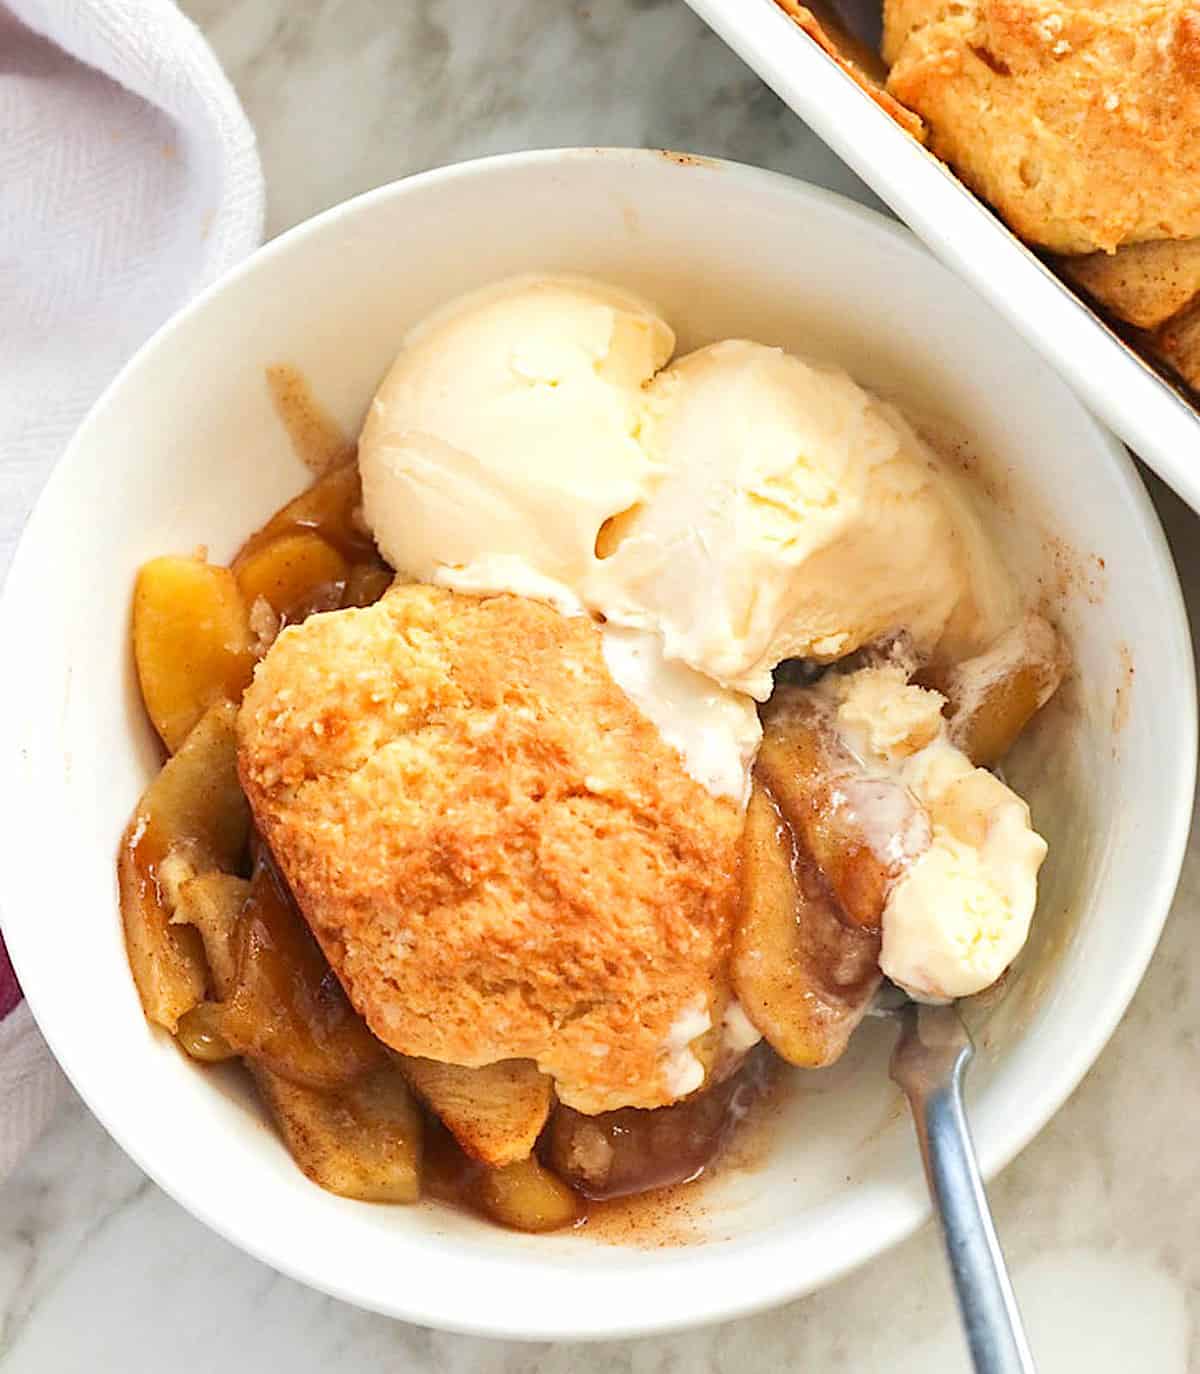 Insanely delicious apple cobbler with ice cream